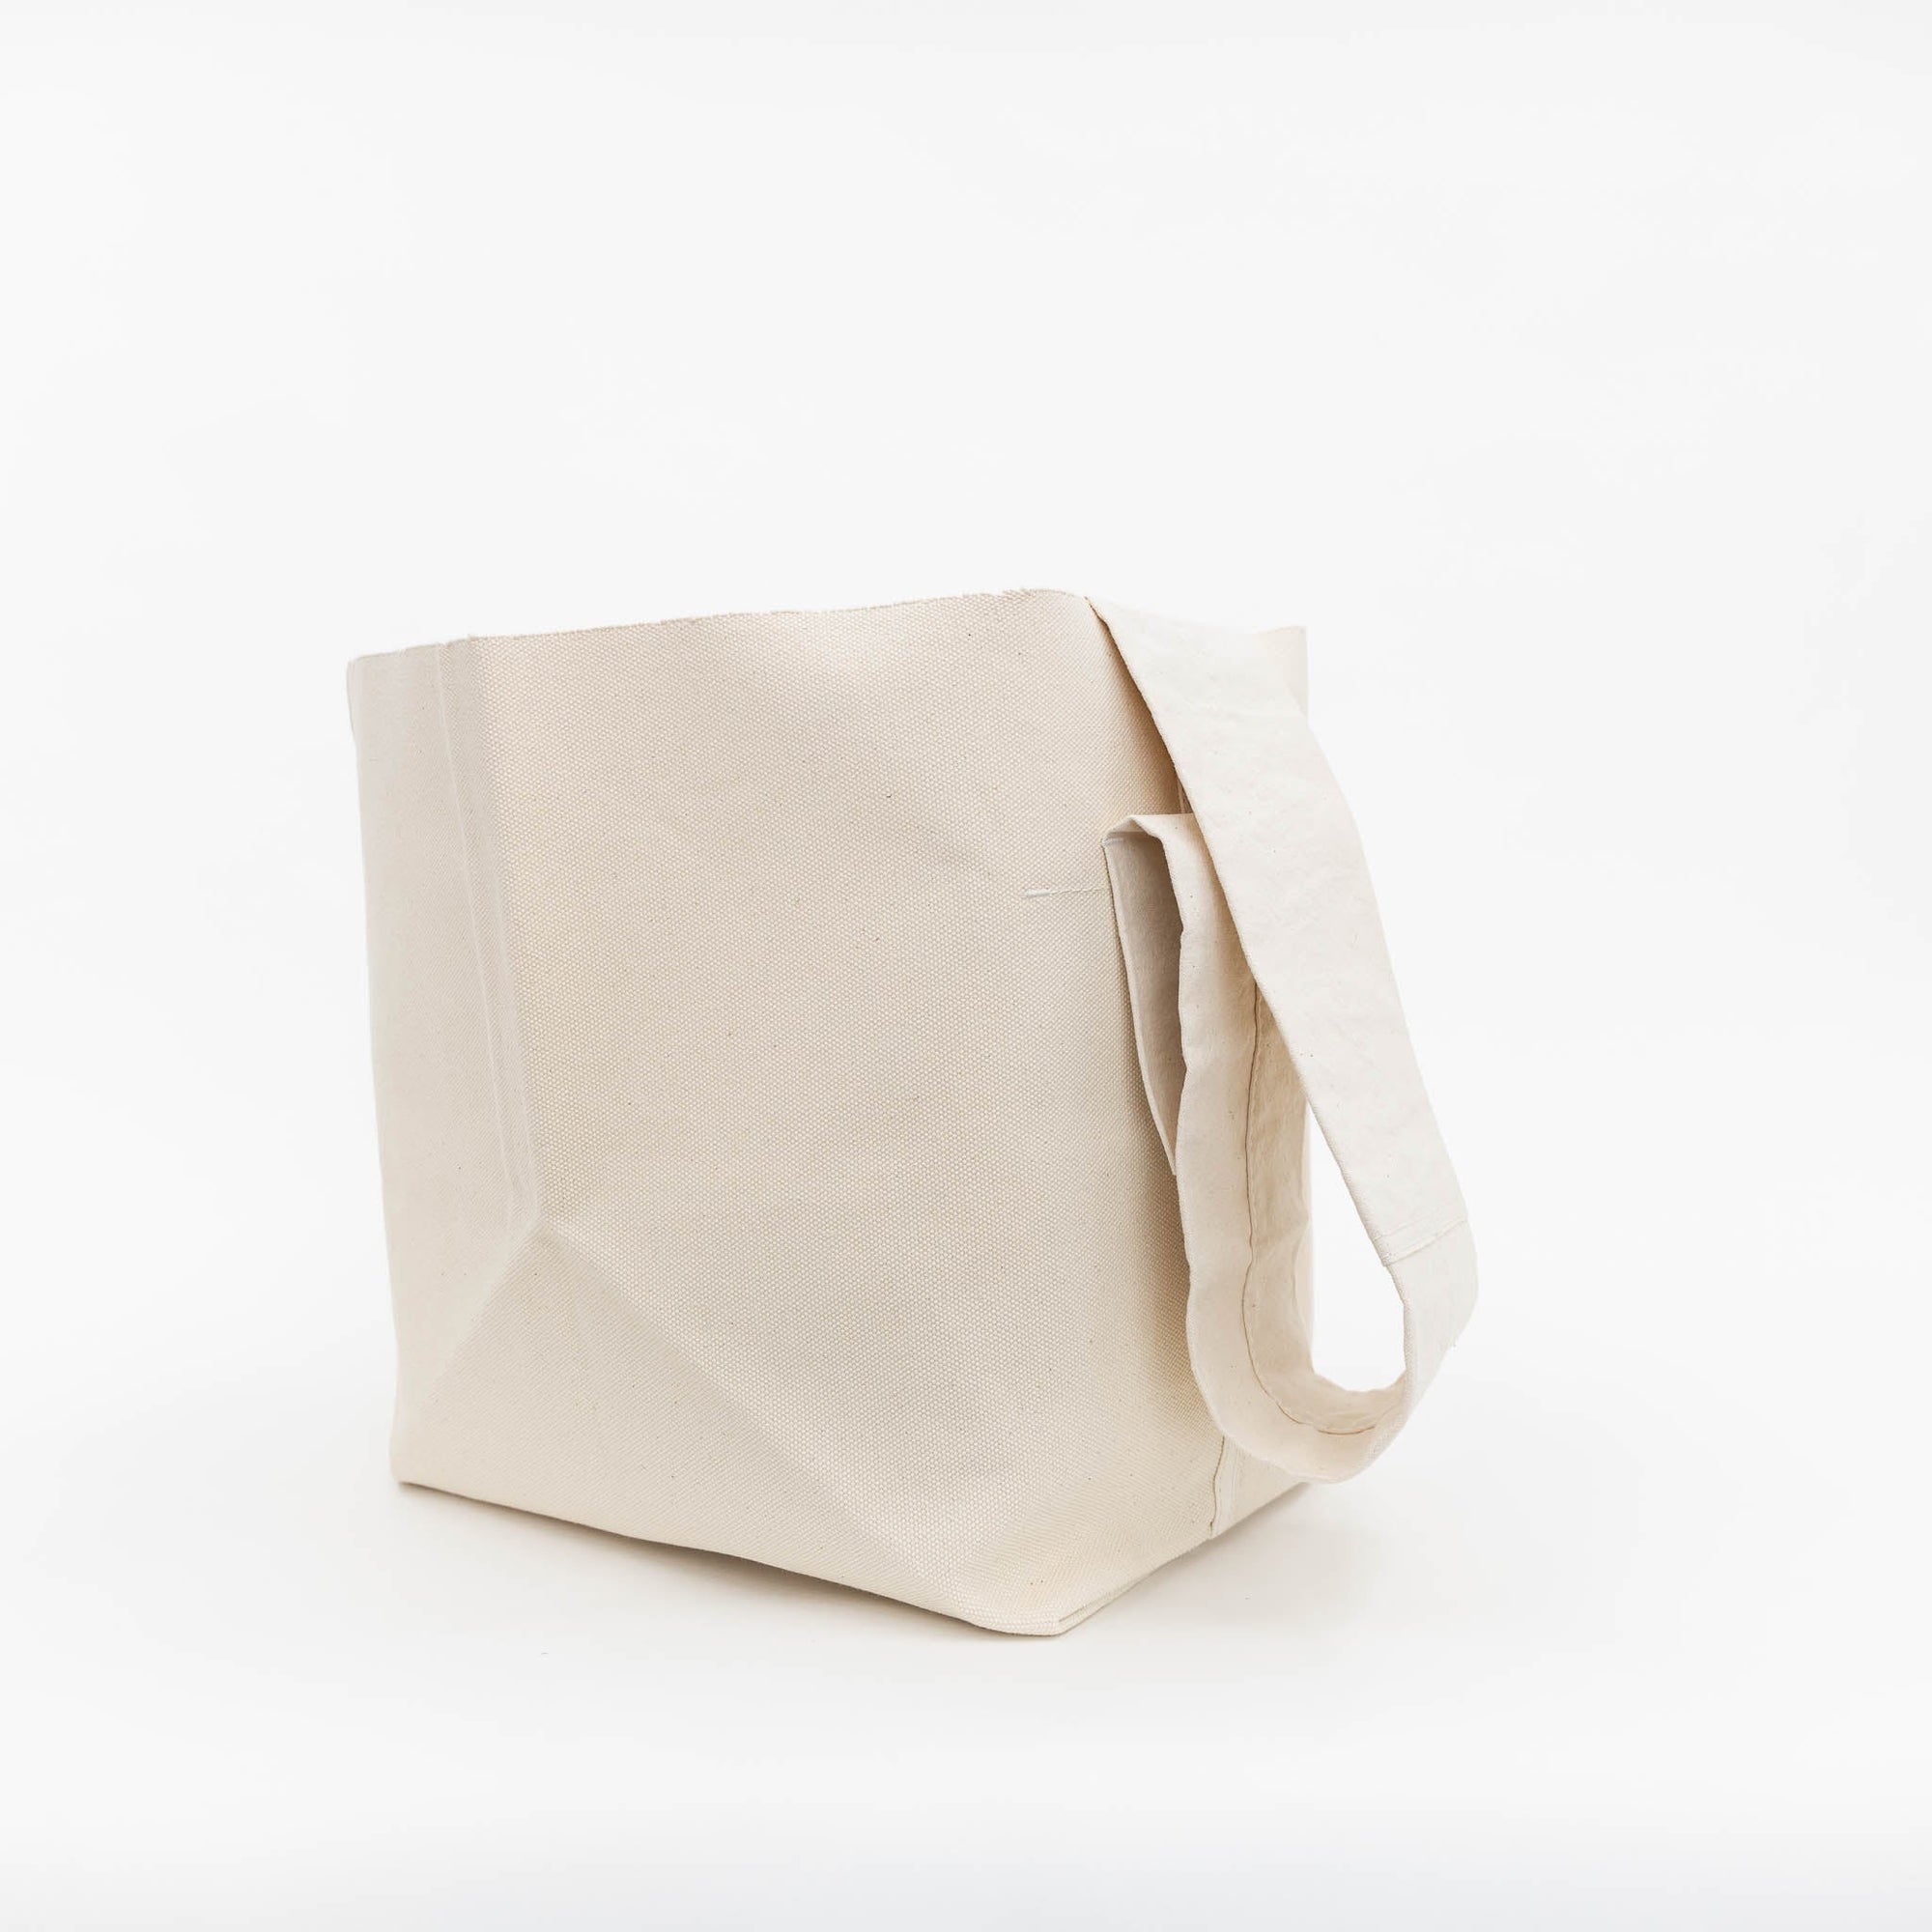 How to Live Origami Bag | Tortoise General Store